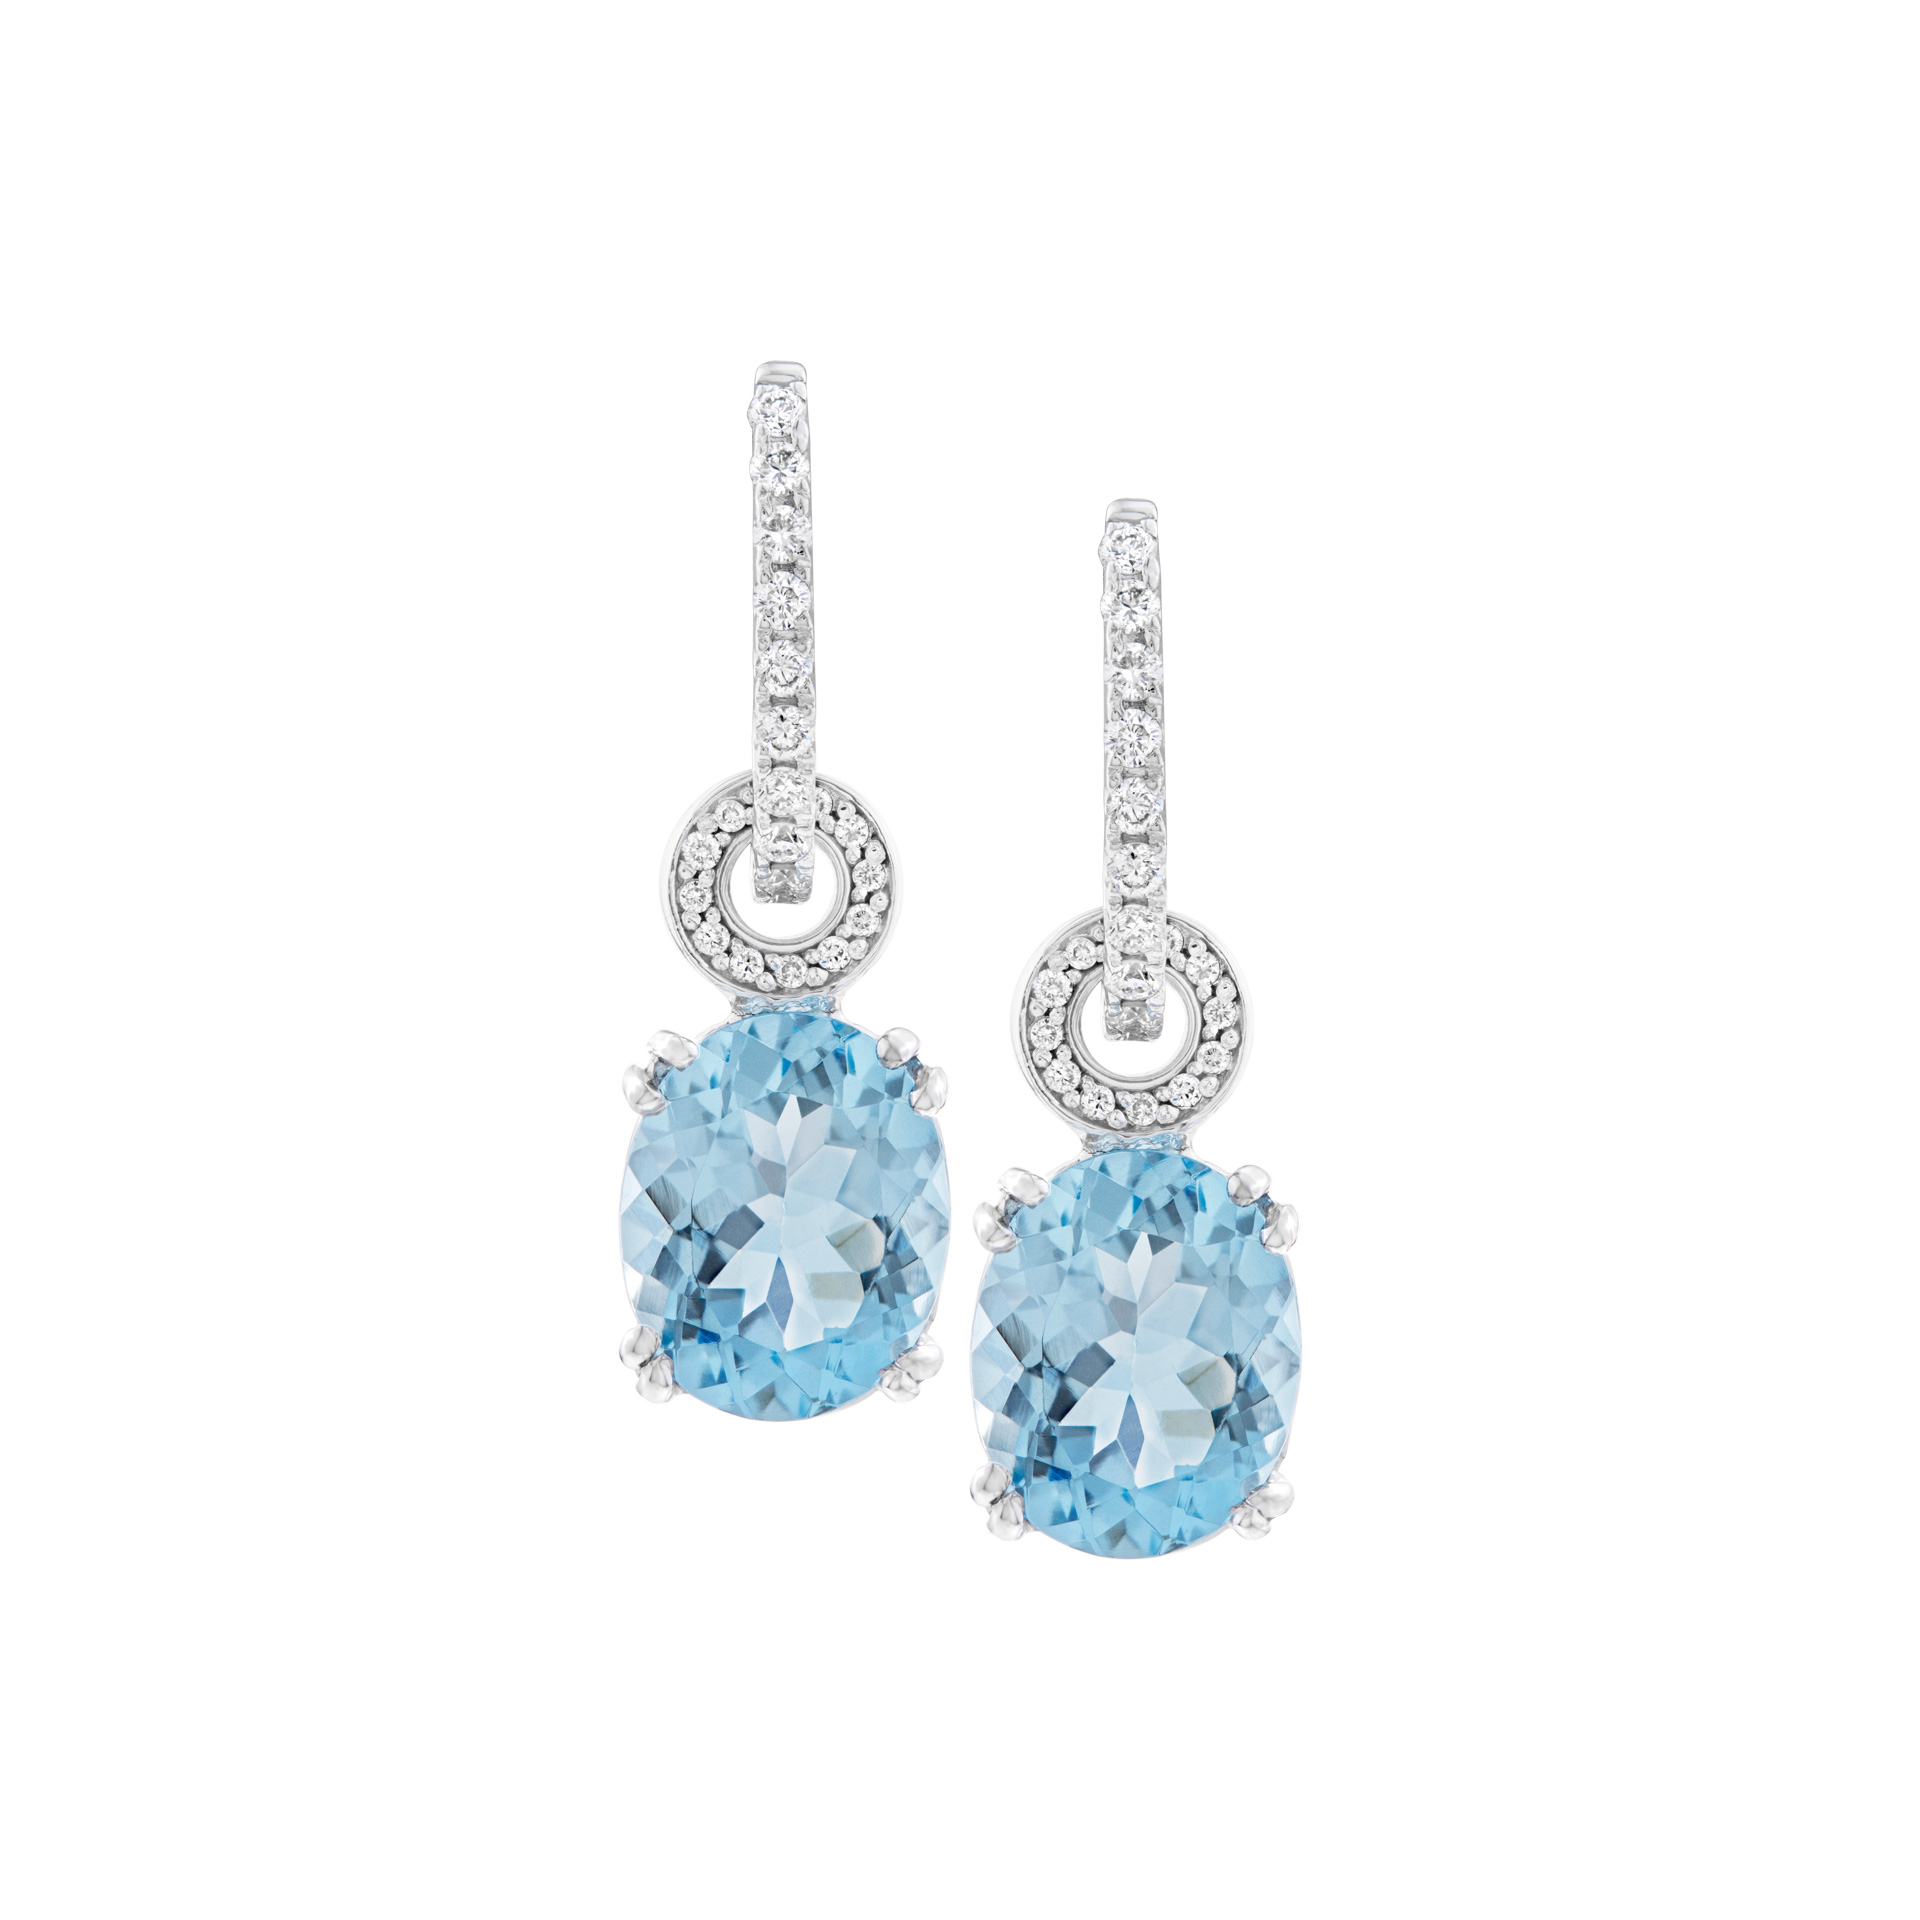 Earrings with Aquamarine and diamonds in 18K white gold